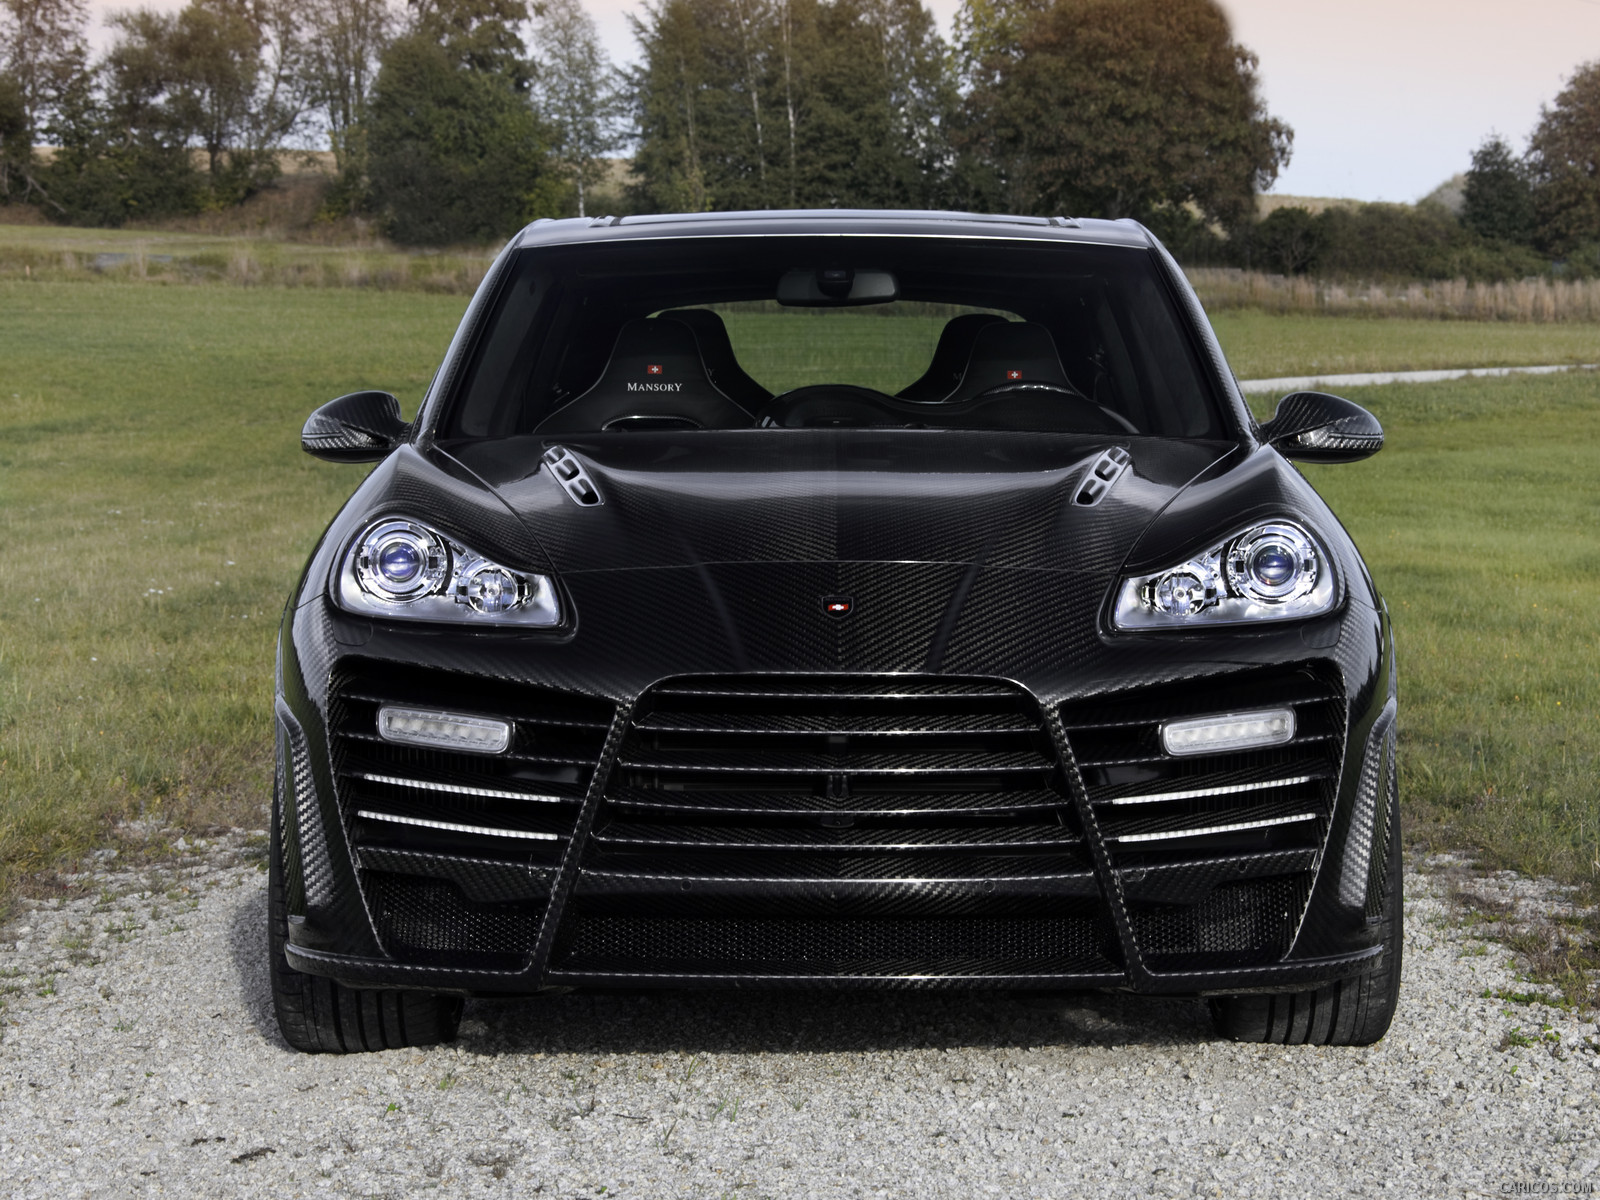 2009 Mansory Chopster based on Porsche Cayenne Turbo S  - Front, #13 of 38